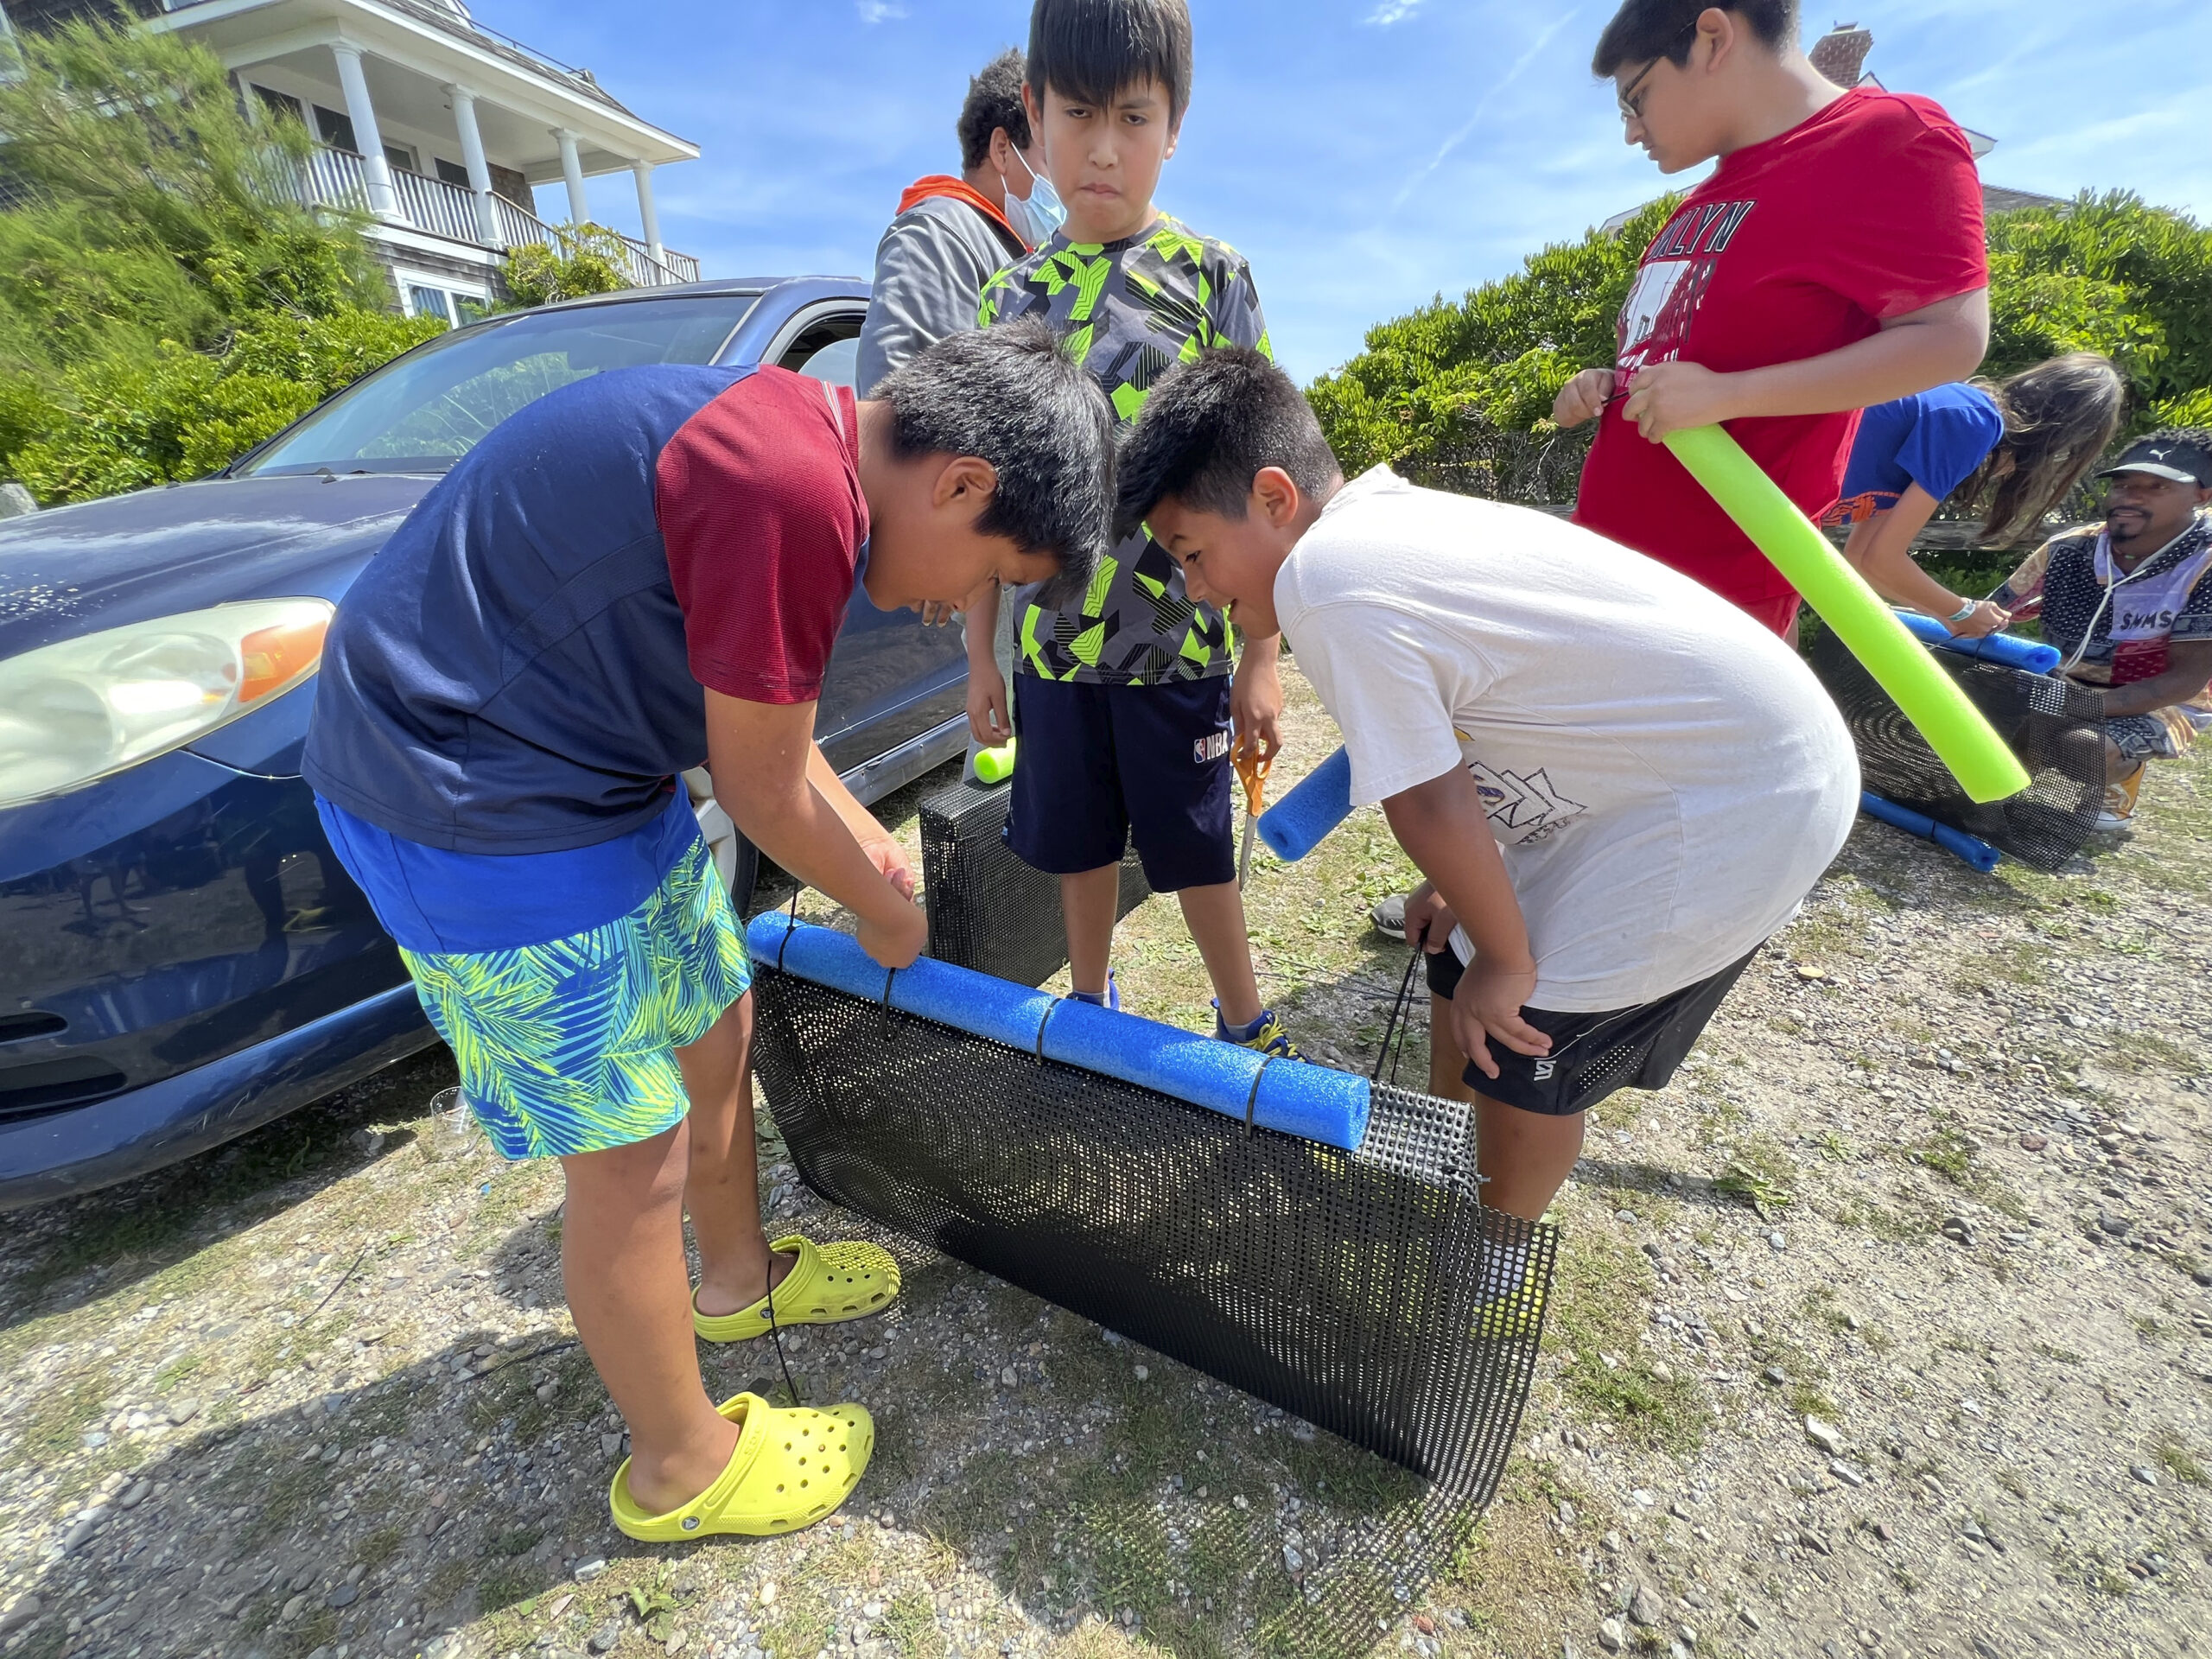 Kids from the Bridgehampton Child Care and Center constrict an oyster cage at the Moriches Bay Project's learn how to make an oyster cage and set up a farm event in Westhampton on July 8.  DANA SHAW